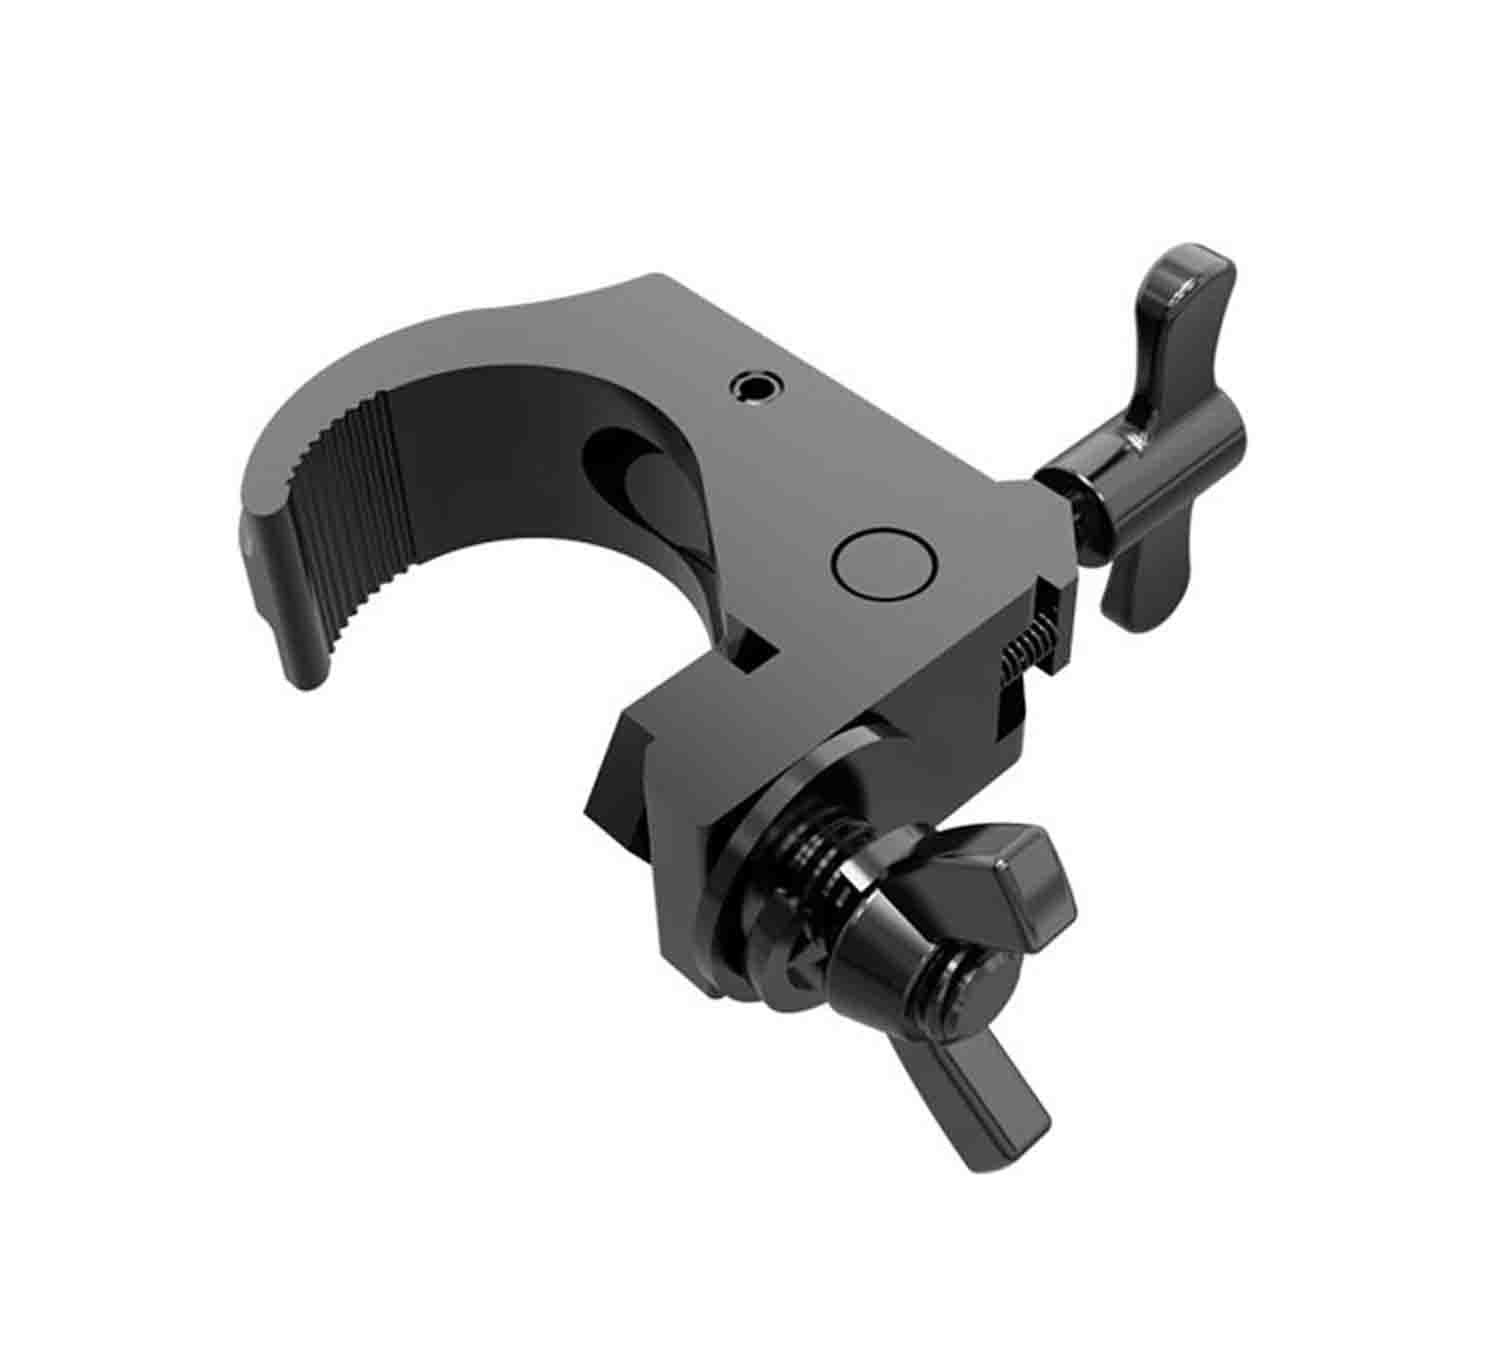 Global Truss JR SNAP CLAMP BLK, Light Duty Low Profile Hook Style Clamp - Black - Hollywood DJ